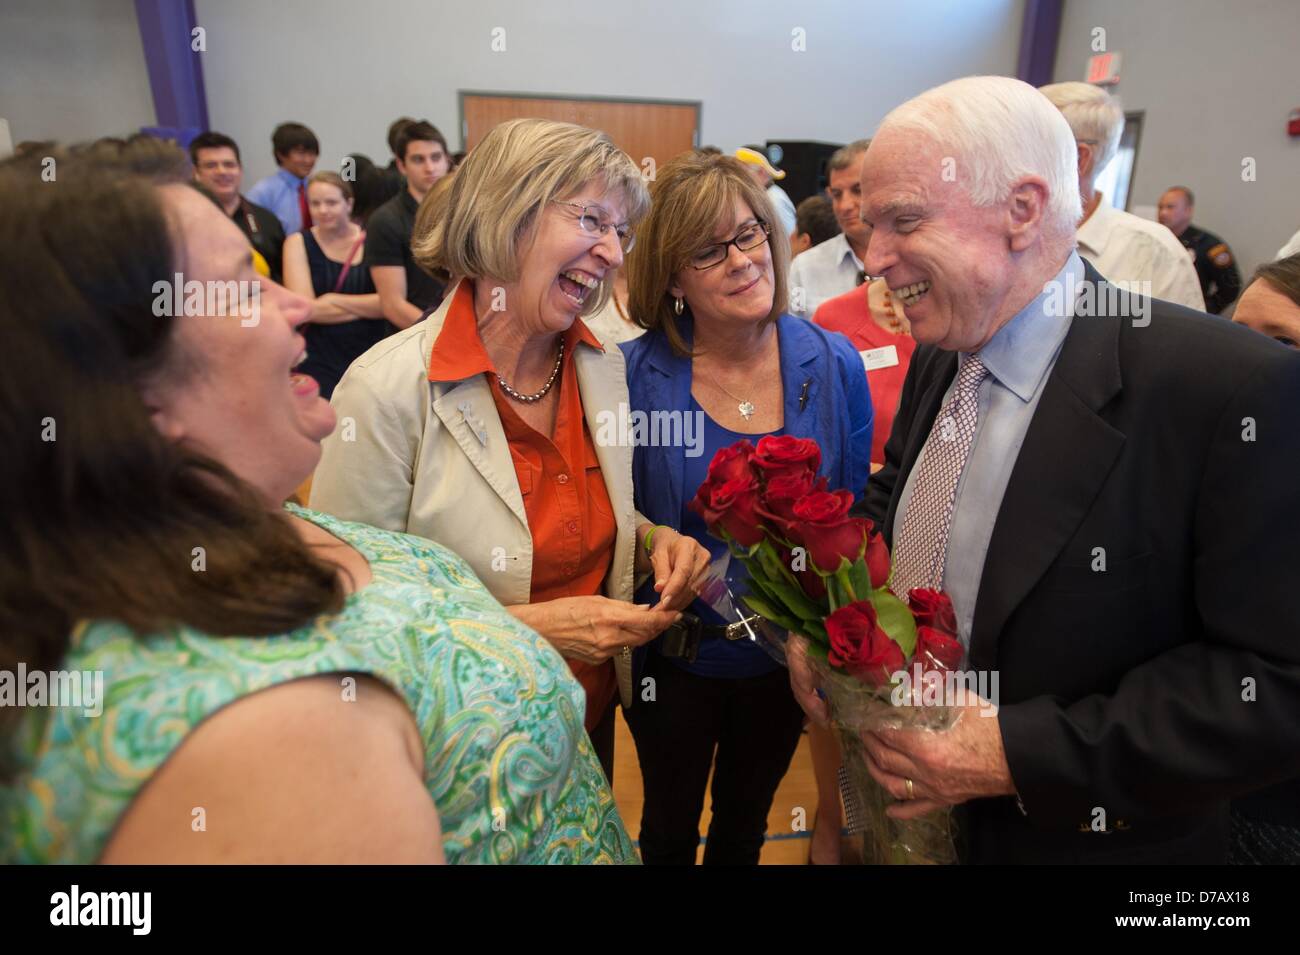 Oro Valley, Arizona, U.S. May 2, 2013. January 8 shooting victims MARY REED, left, and PAM SIMON, center, present Sen. JOHN McCAIN with 19 roses symbolic of the Tucson, Ariz. shooting victims.  McCain held a town hall constituency event at a high school in the Tucson, Ariz. suburb of Oro Valley.  McCain spoke about gun control and immigration, as well as a need to balance the budget to approximately 200 people.  McCain derided the administration for sequestration, and called for a need to de-glamorize drug use as a means of reducing border-related crime. (Credit Image: © Will Seberger/ZUMAPR Stock Photo